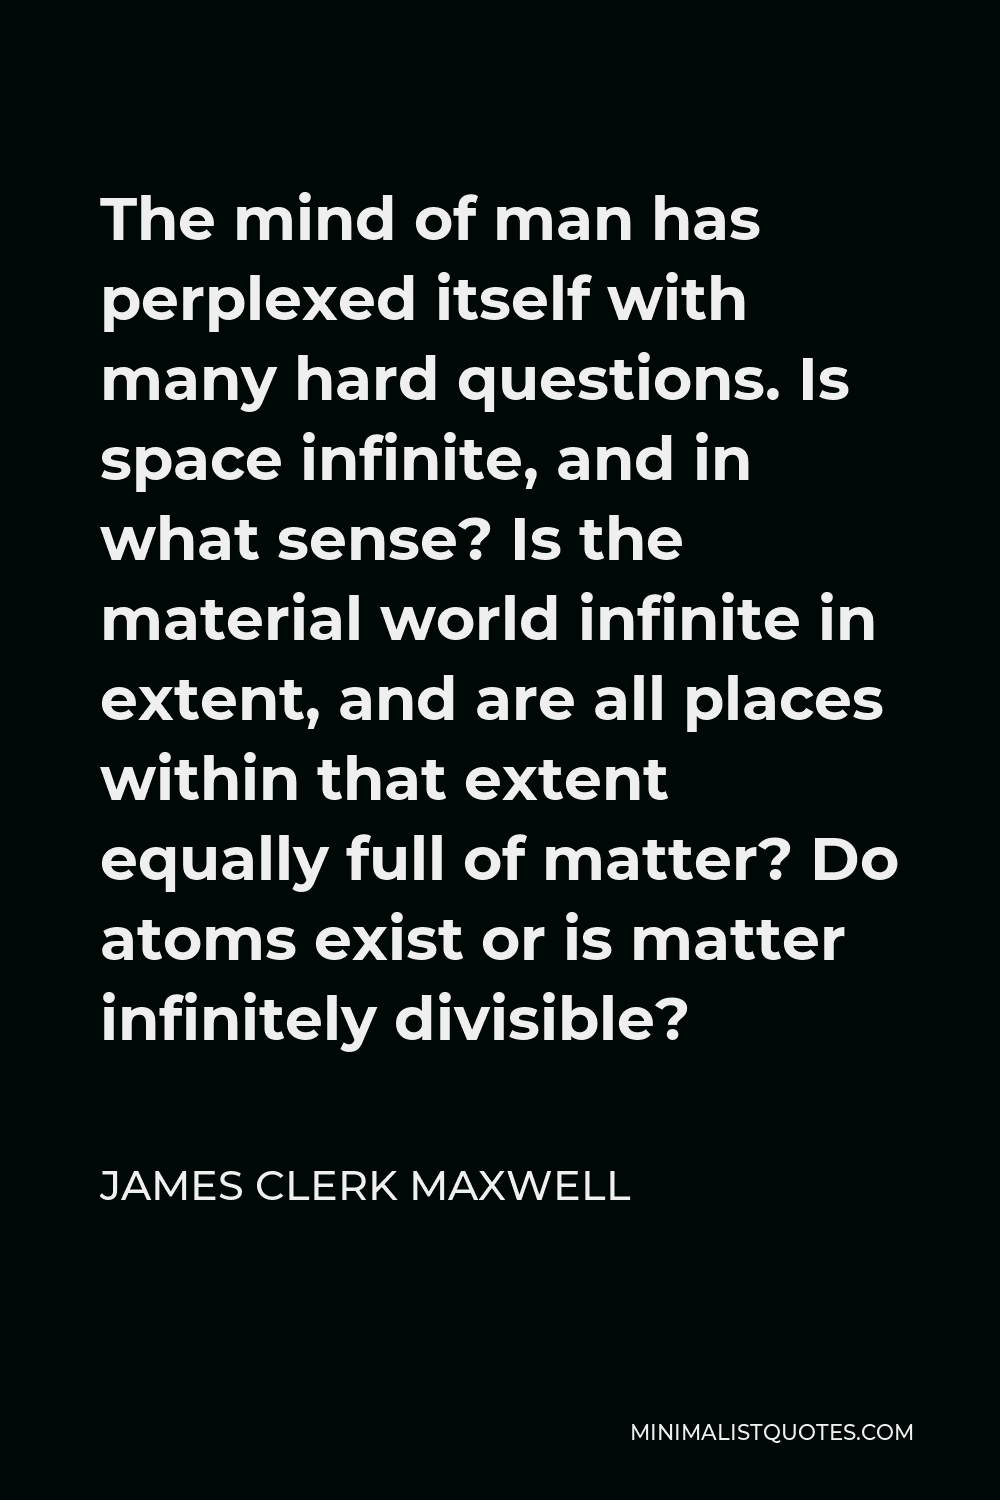 James Clerk Maxwell Quote - The mind of man has perplexed itself with many hard questions. Is space infinite, and in what sense? Is the material world infinite in extent, and are all places within that extent equally full of matter? Do atoms exist or is matter infinitely divisible?